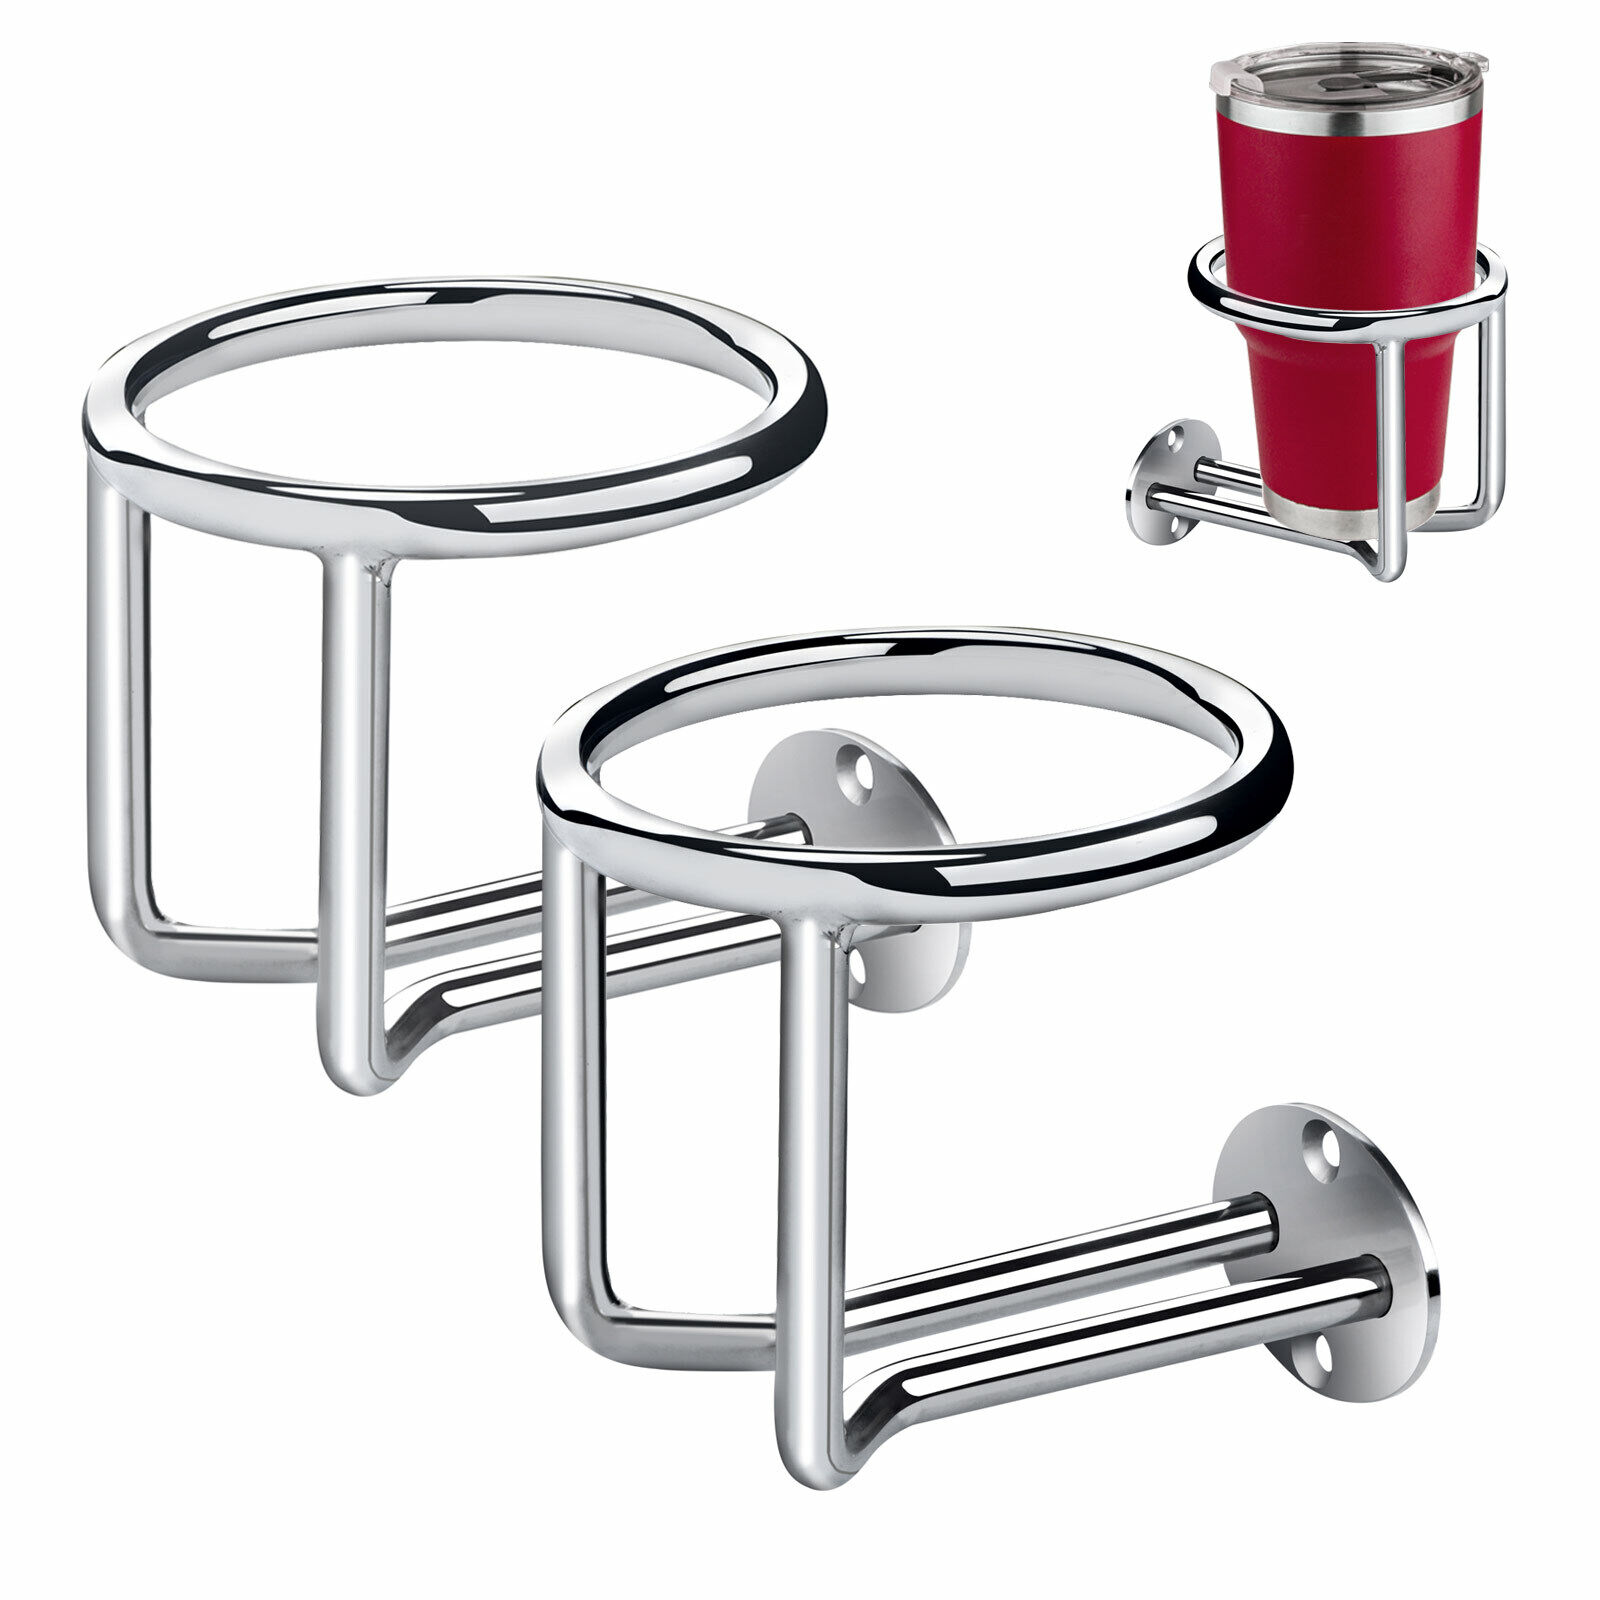 2X Marine Stainless Steel Ring Cup Drink Holder Polished Multipurpose Heavy Duty